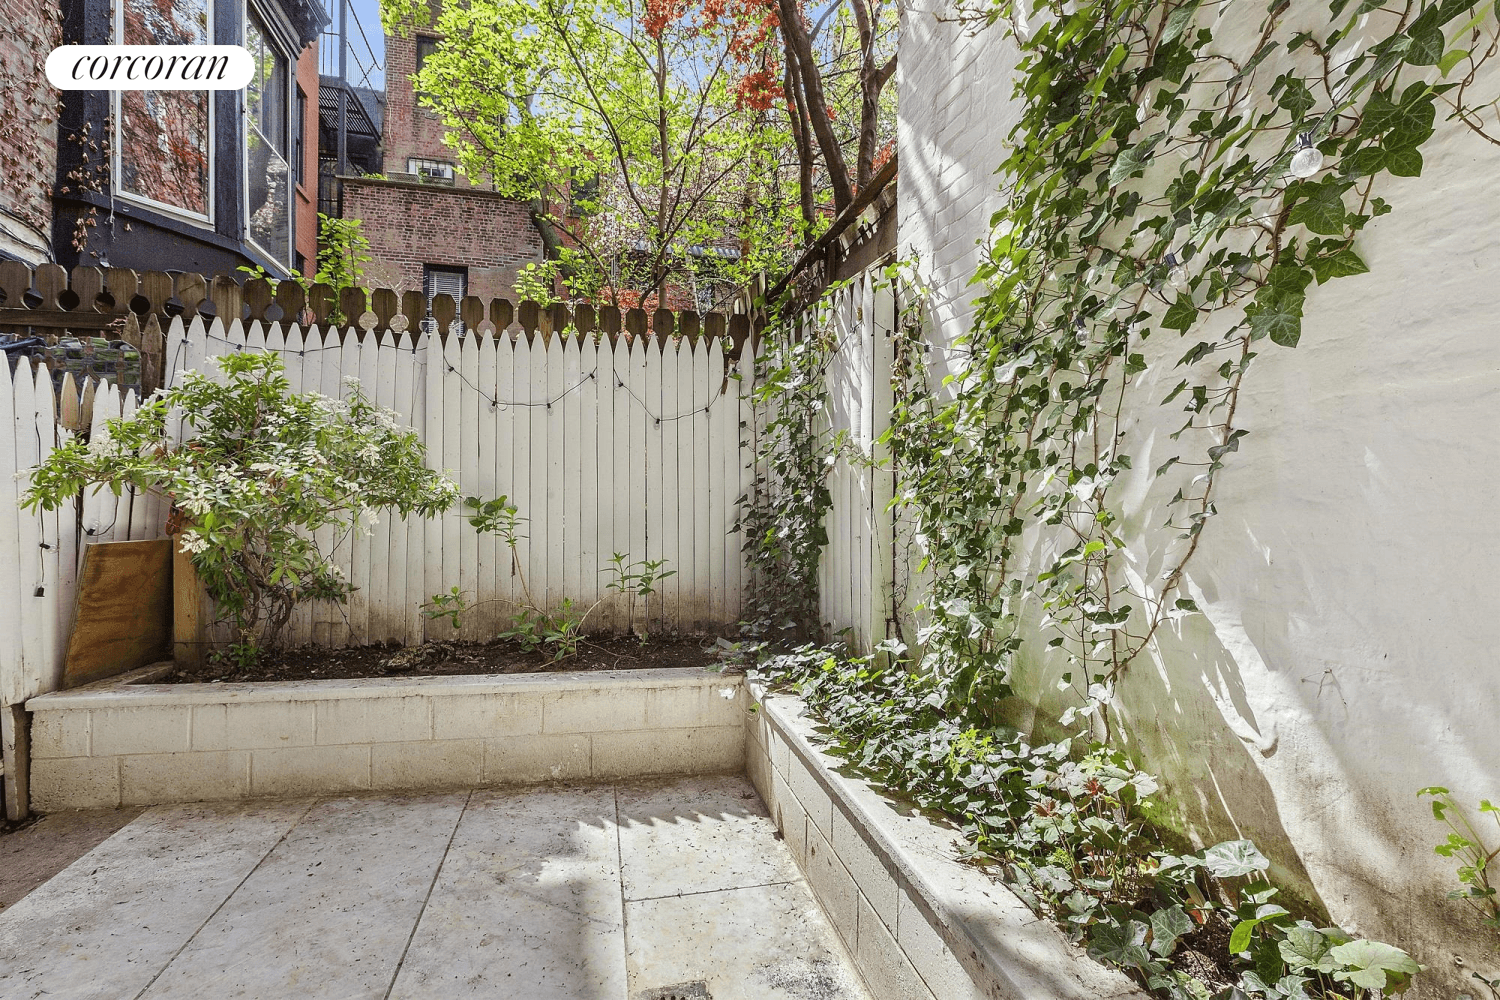 This charming one bedroom has its own private garden located between idyllic Perry Street and West 4th St.